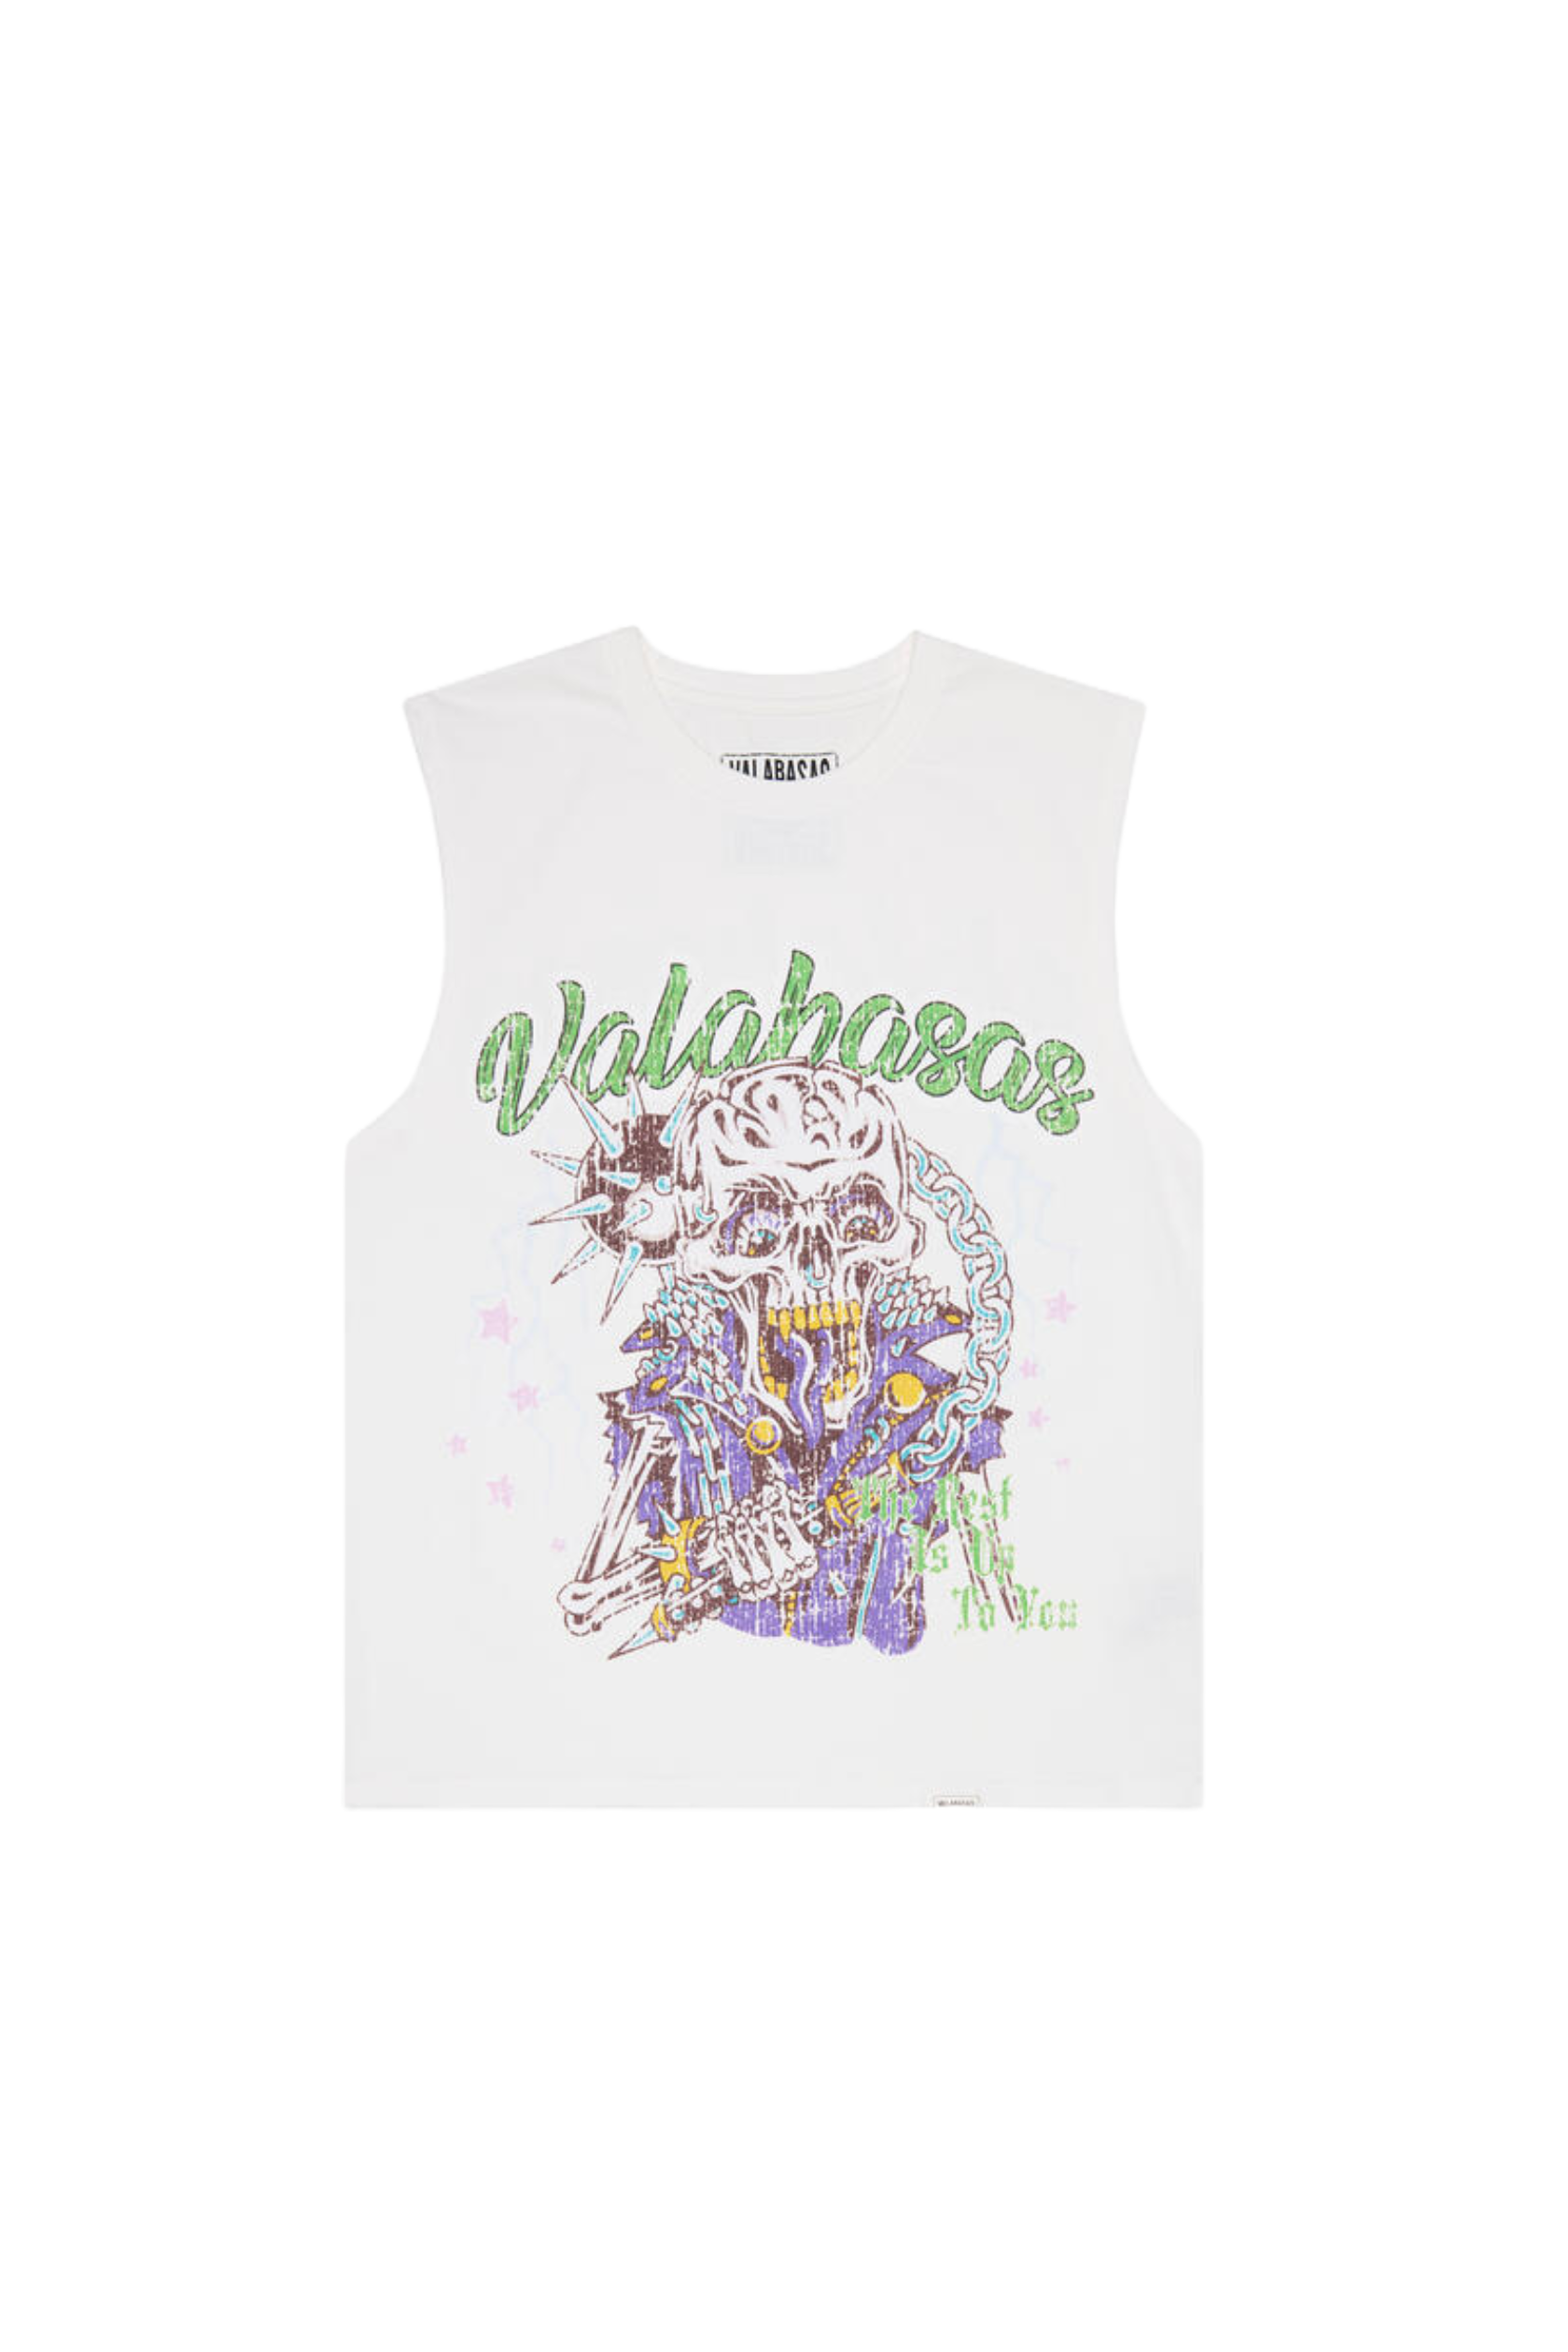 VALABASAS "RESTED" VINTAGE WHITE CUT OFF TEE